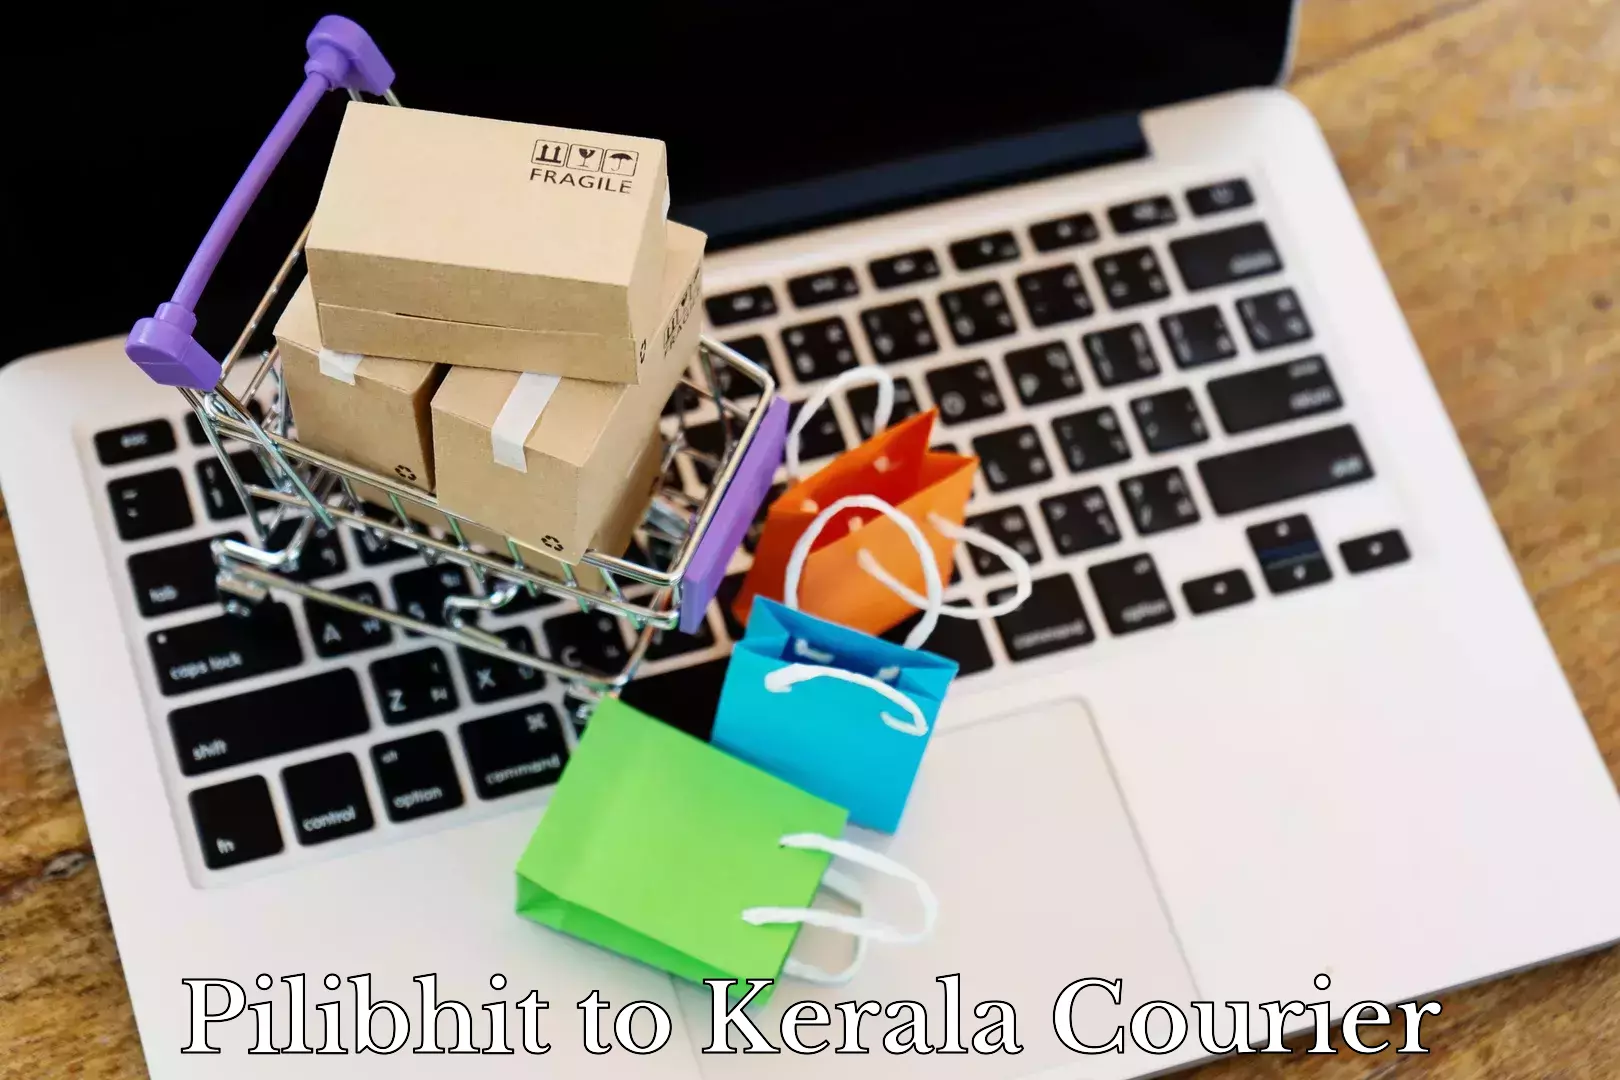 Luggage delivery network Pilibhit to Kerala